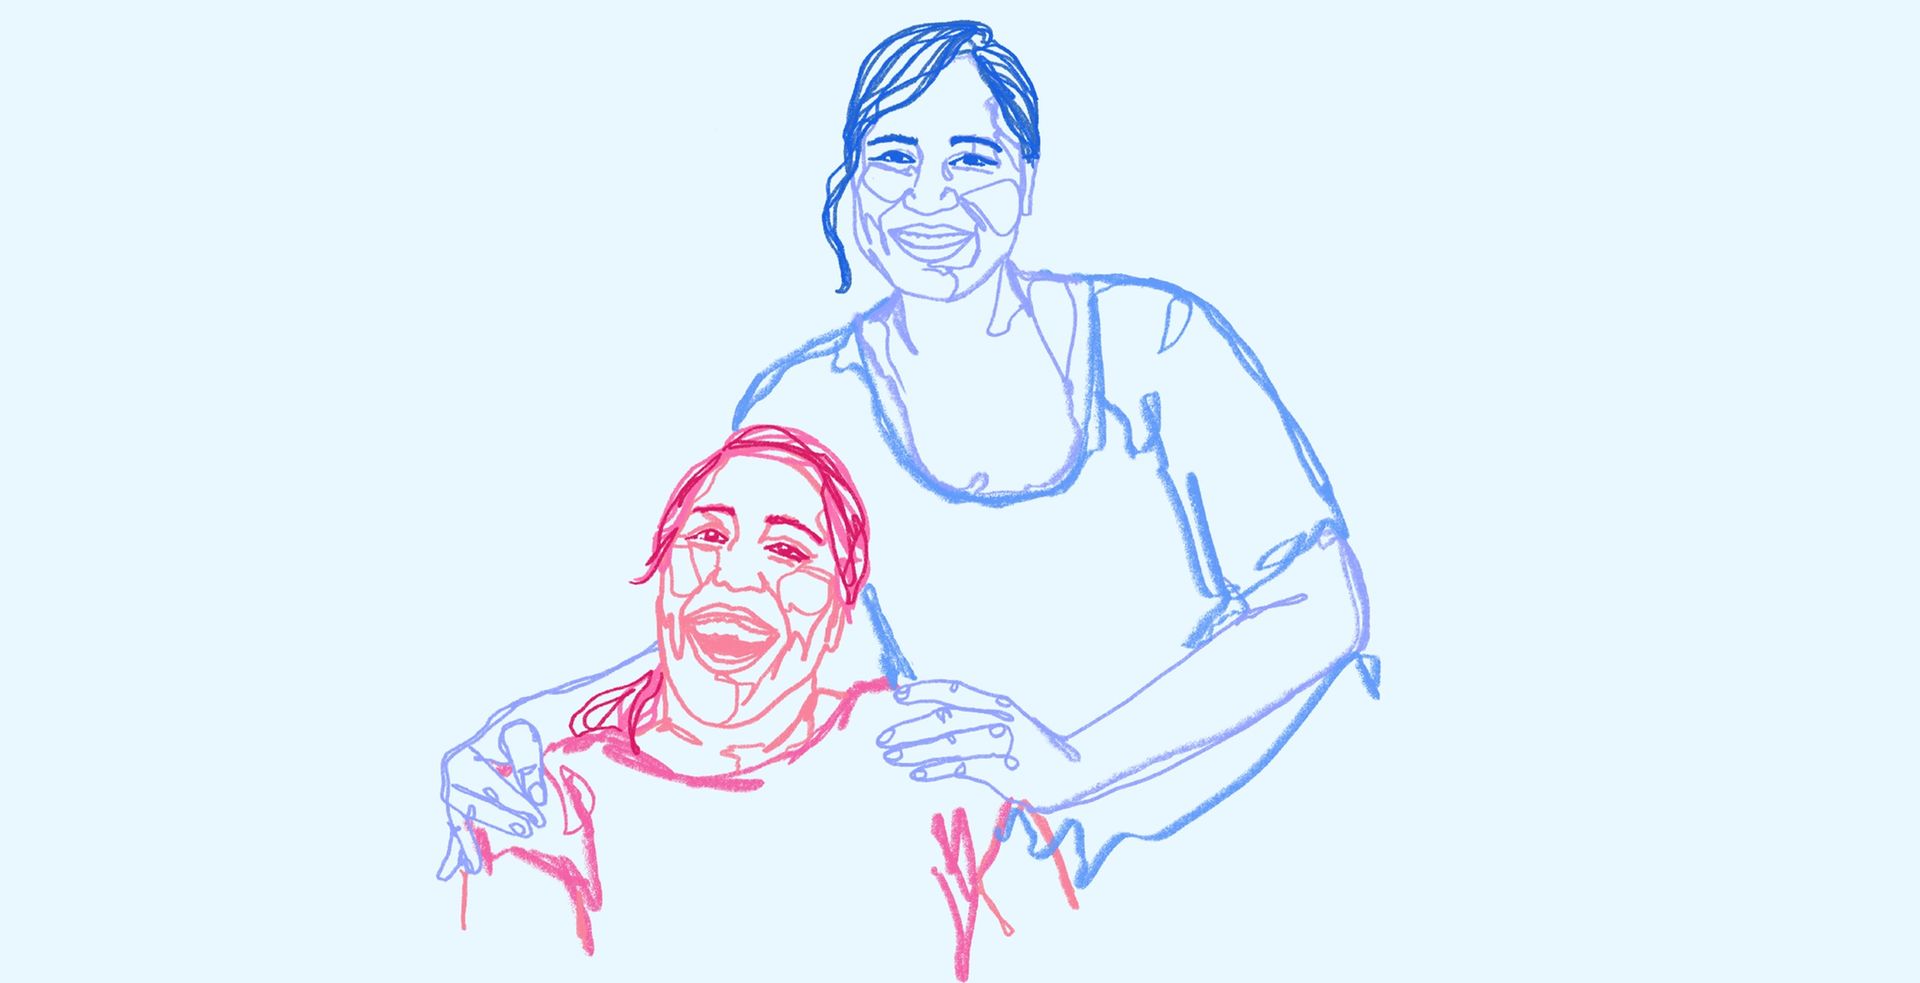 Illustrated portrait of Lakshmee and Annie Lachhman-Persad